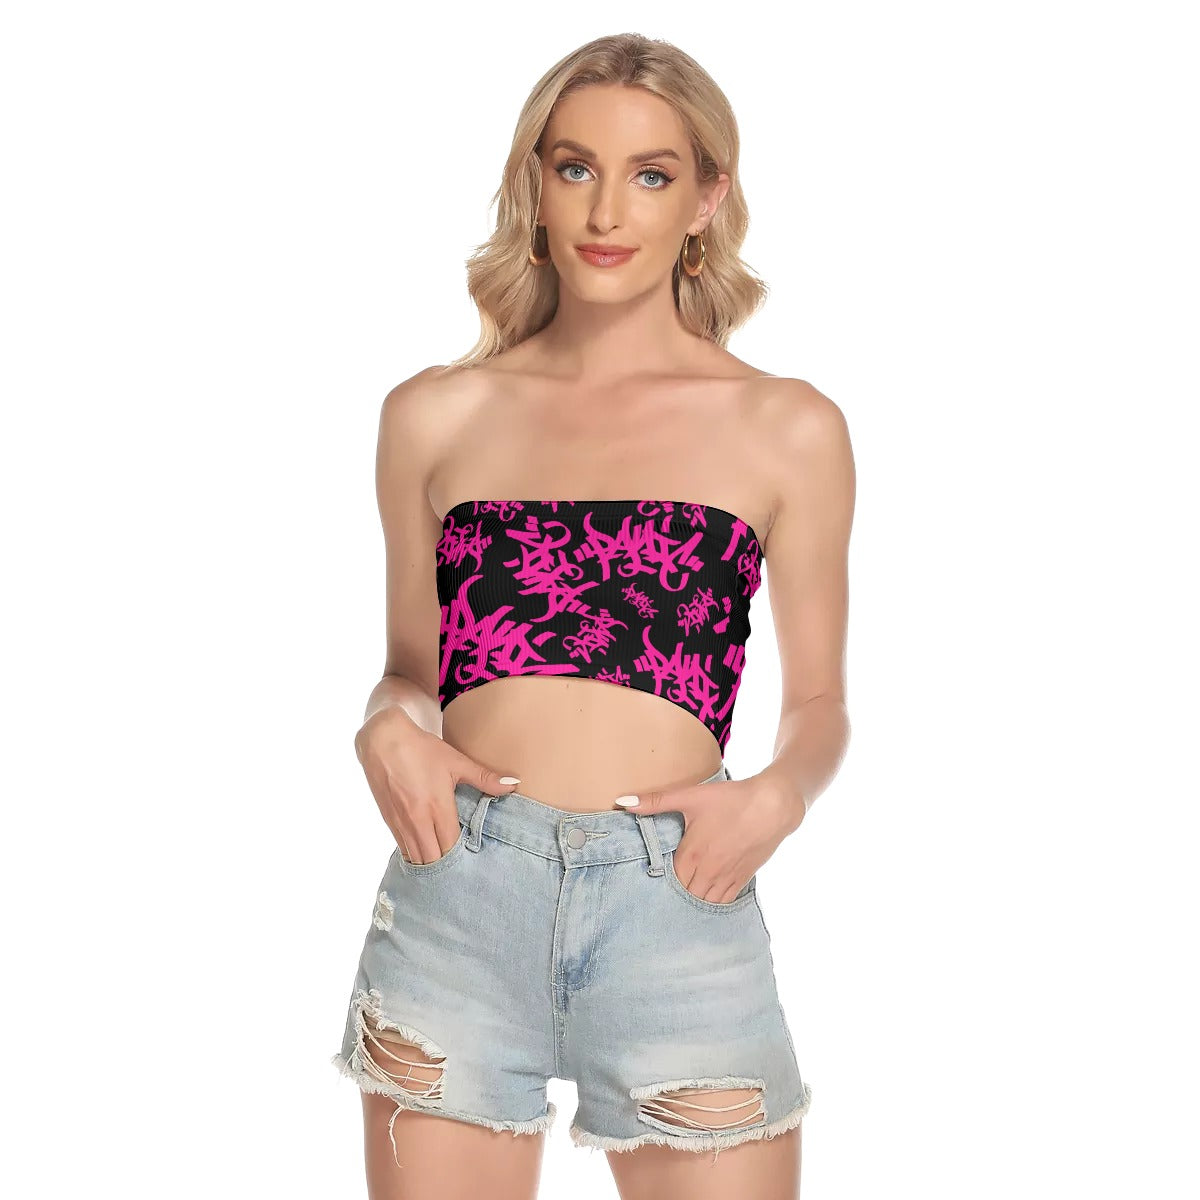 THE TAG TUBE TOP IN BLACK/HOT PINK - Panic 39